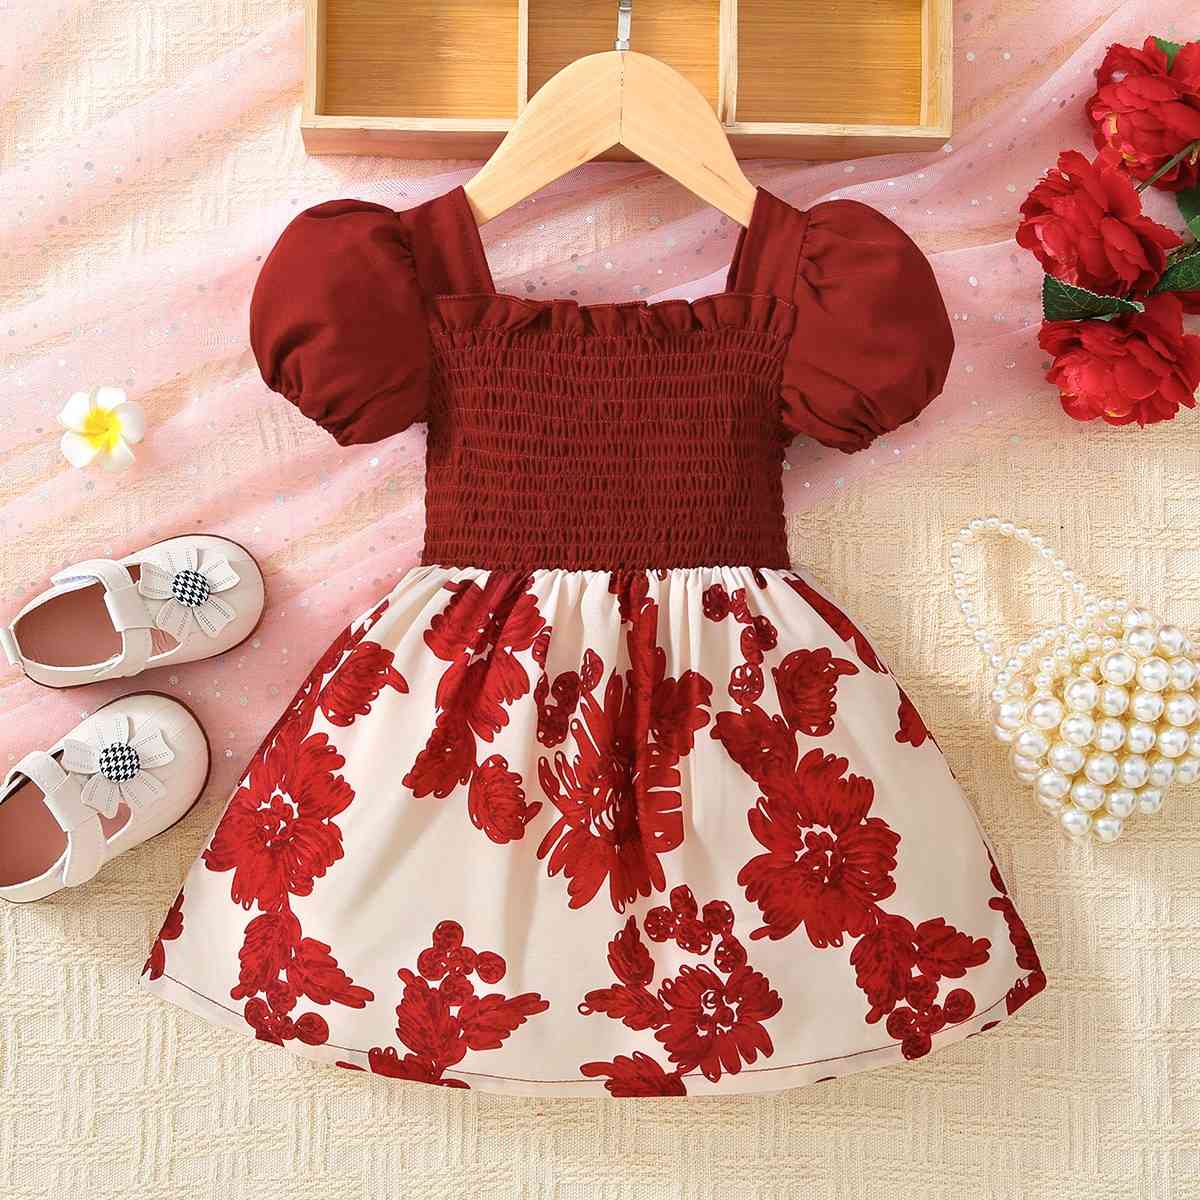 Ivy Reina United States Deep Red 3-6M undefined undefined